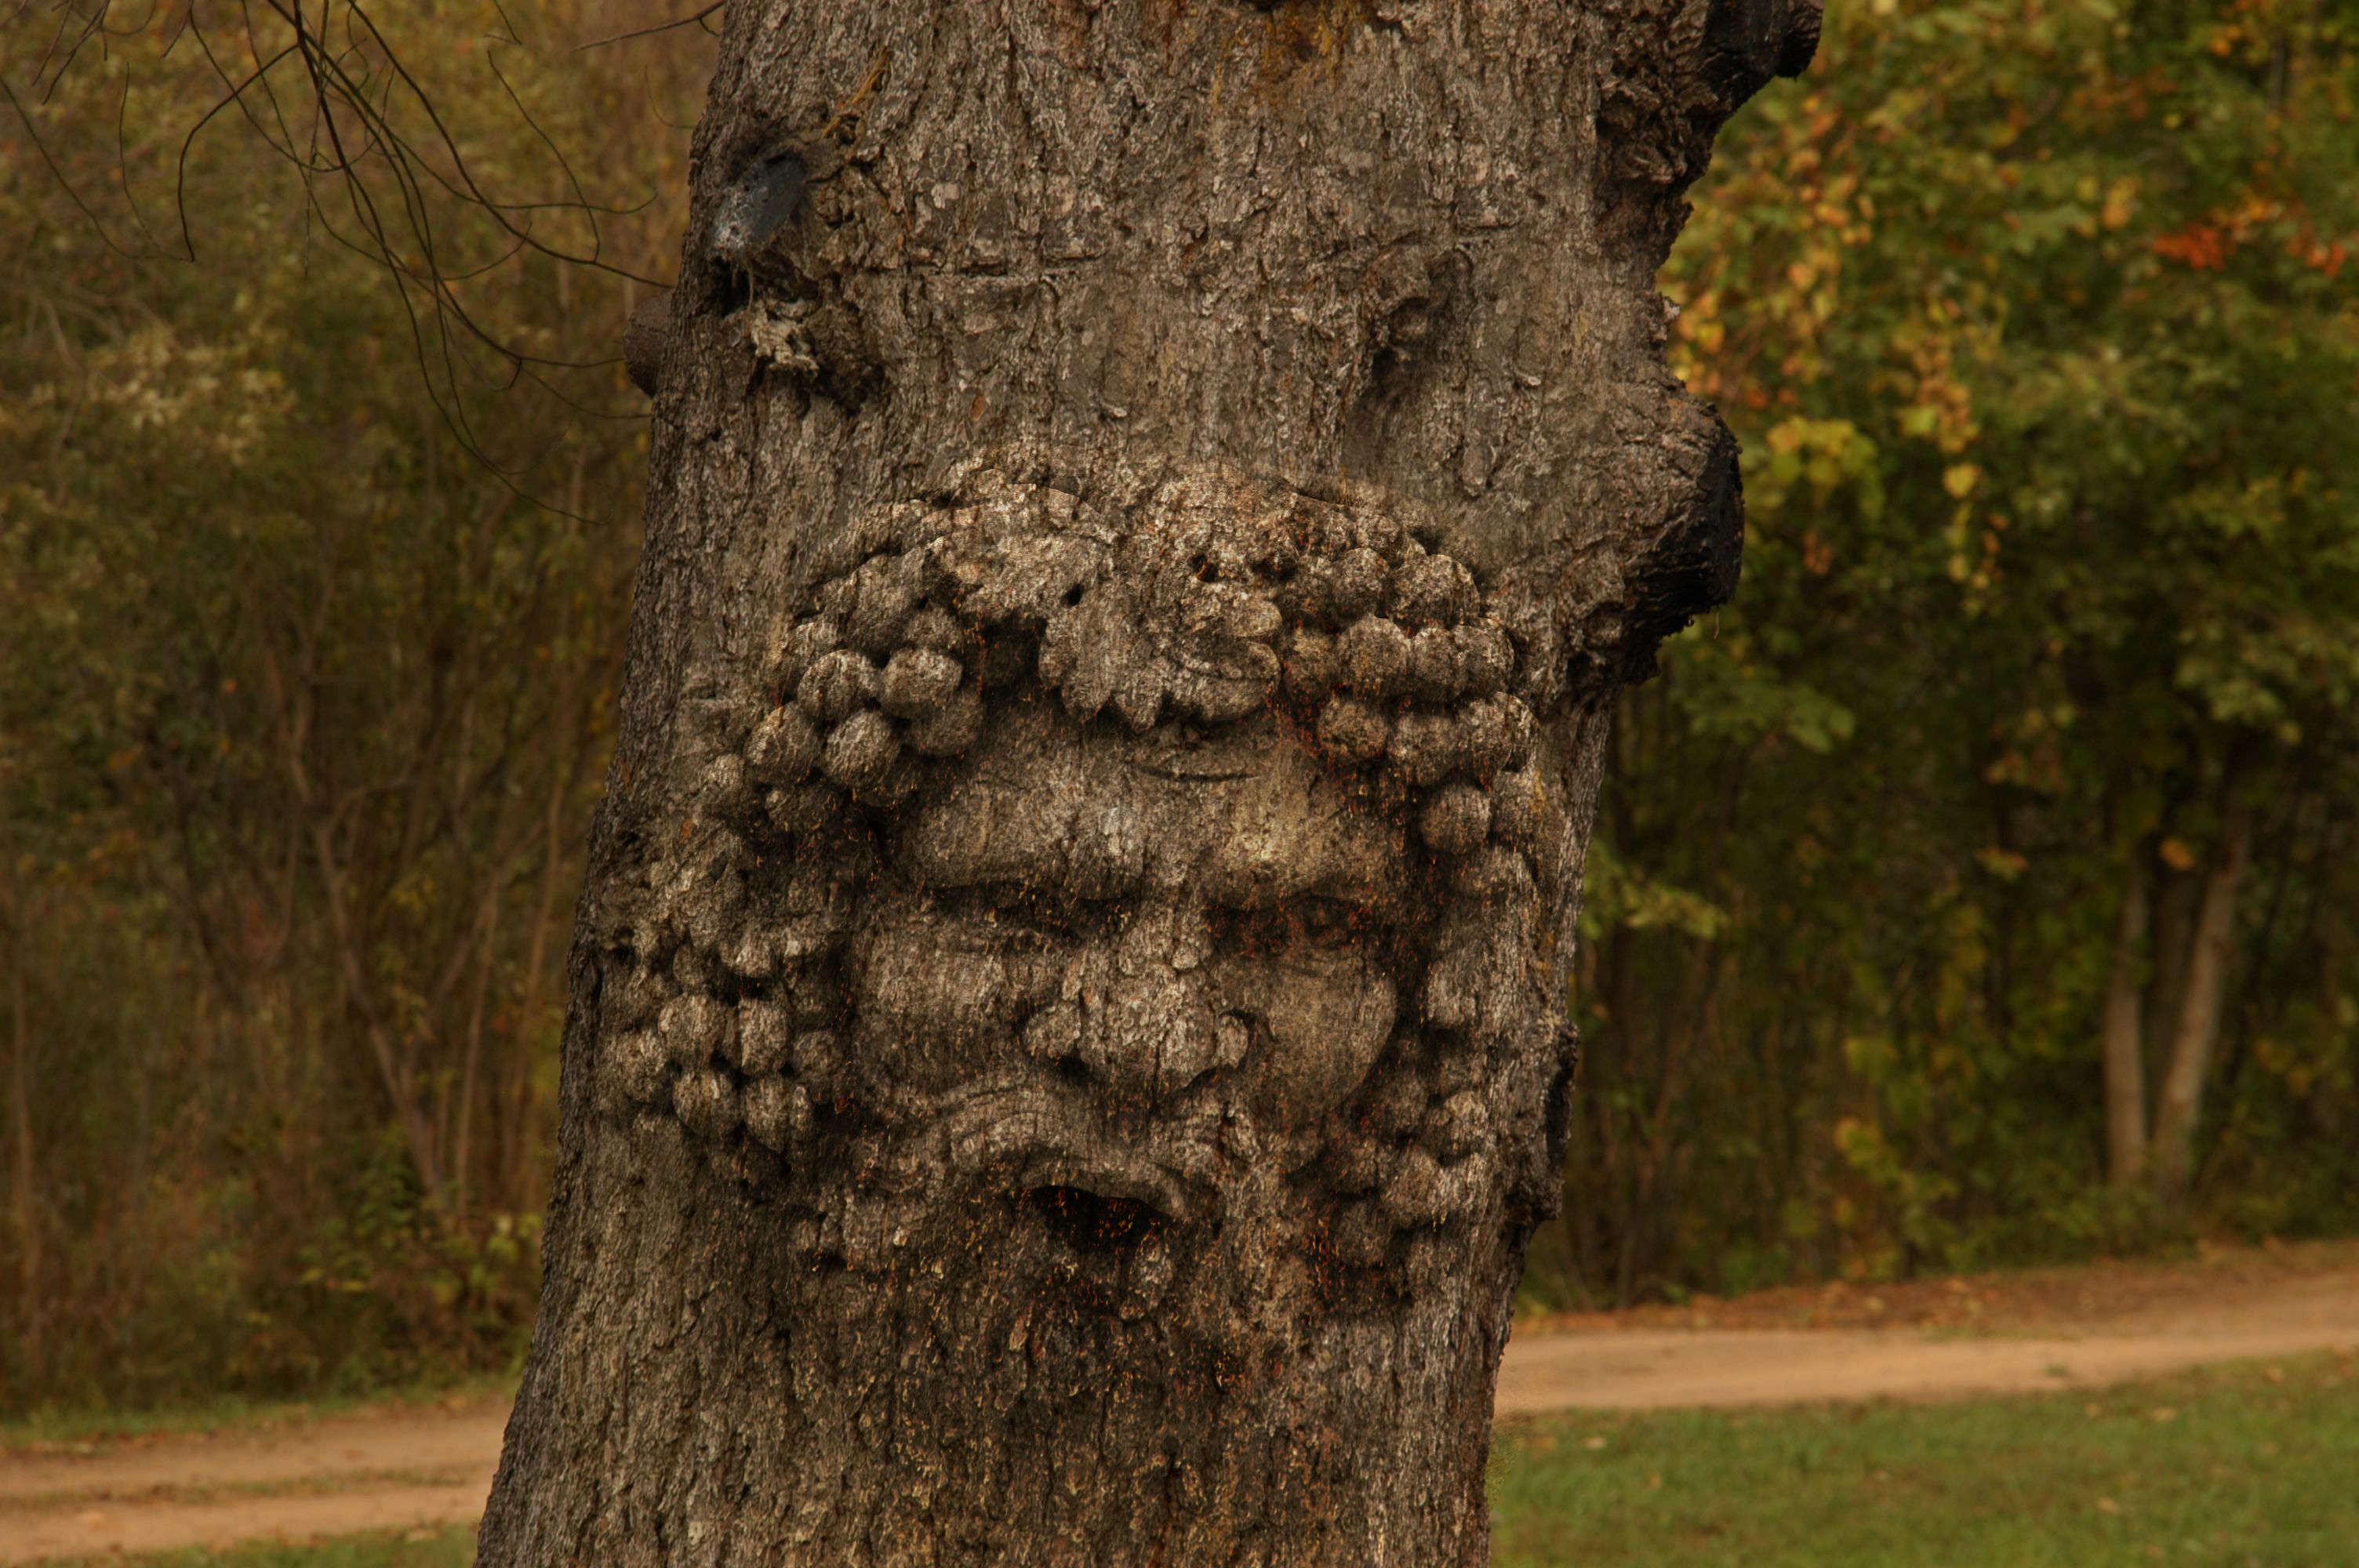 old tree man picture, by sanky89 for: old man tree photoshop contest ...